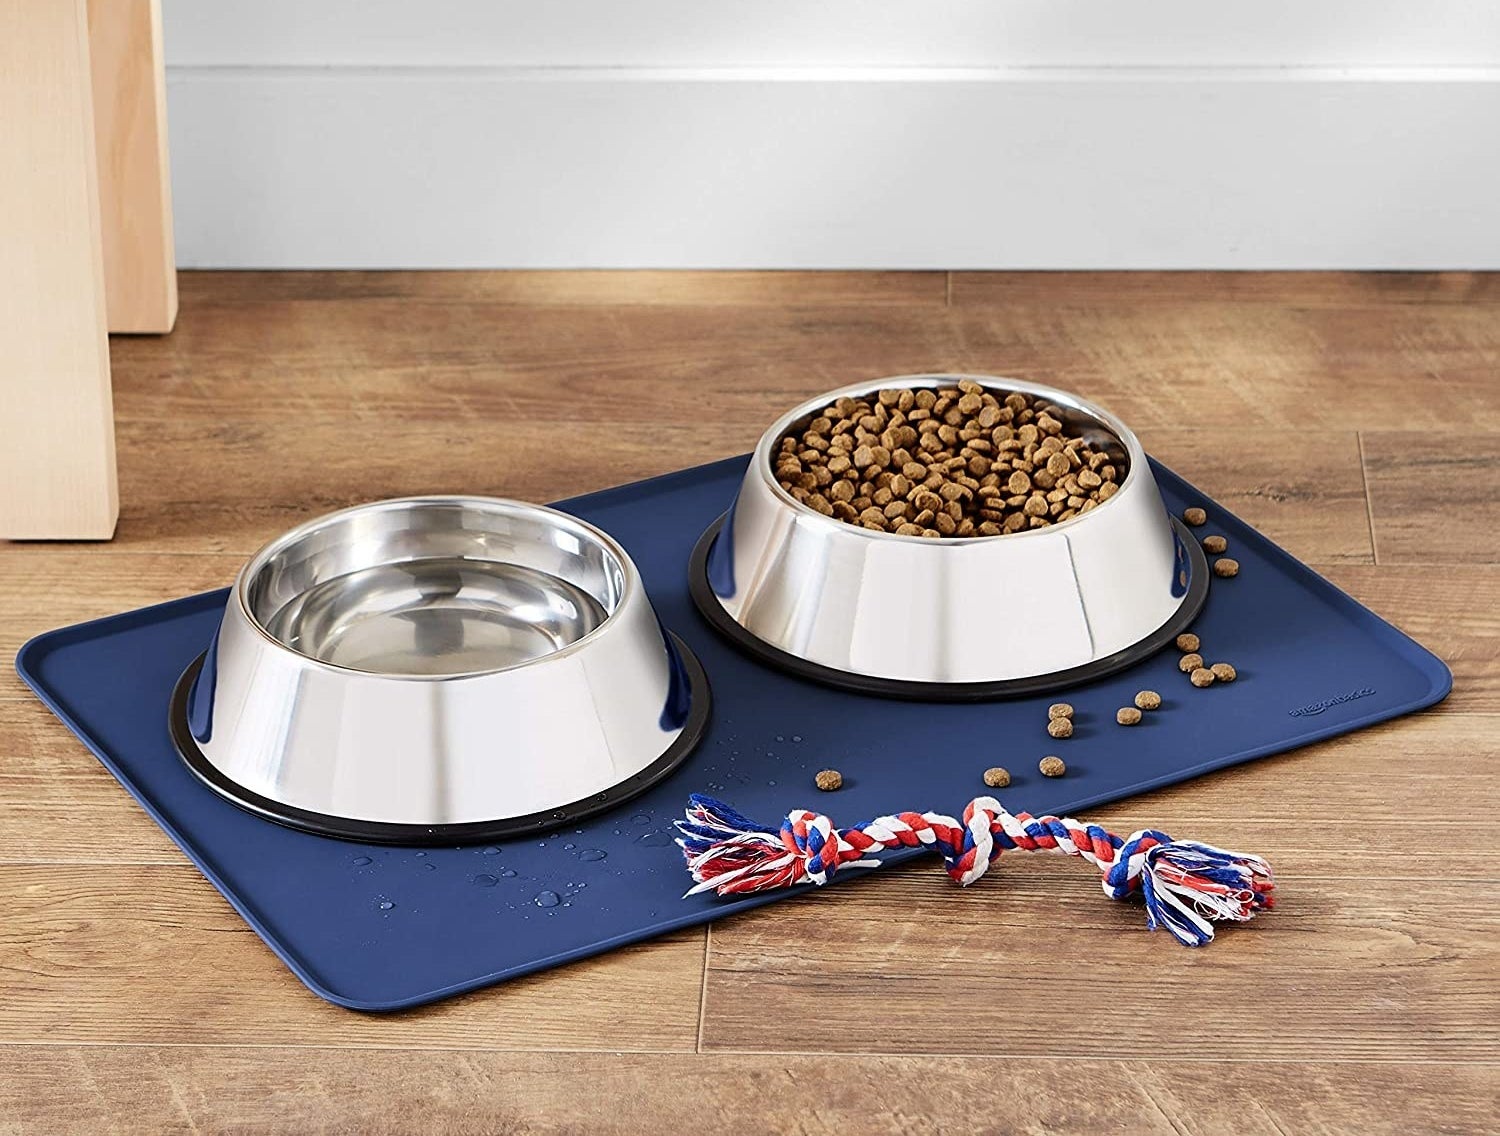 a silicone food mat under two dog bowls filled with kibble and water